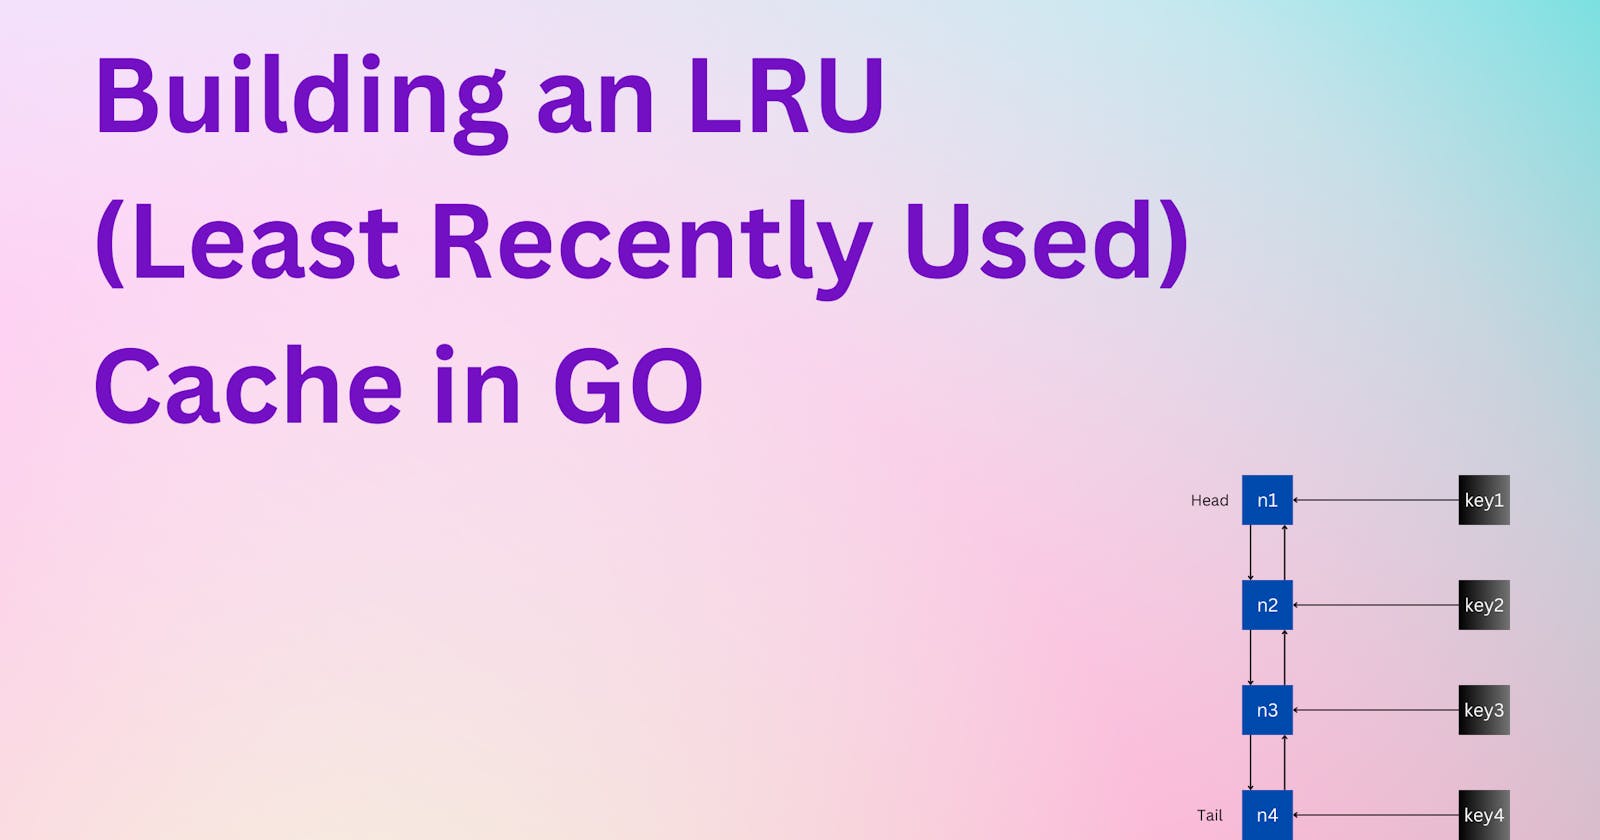 Building an LRU (Least Recently Used) Cache in GO